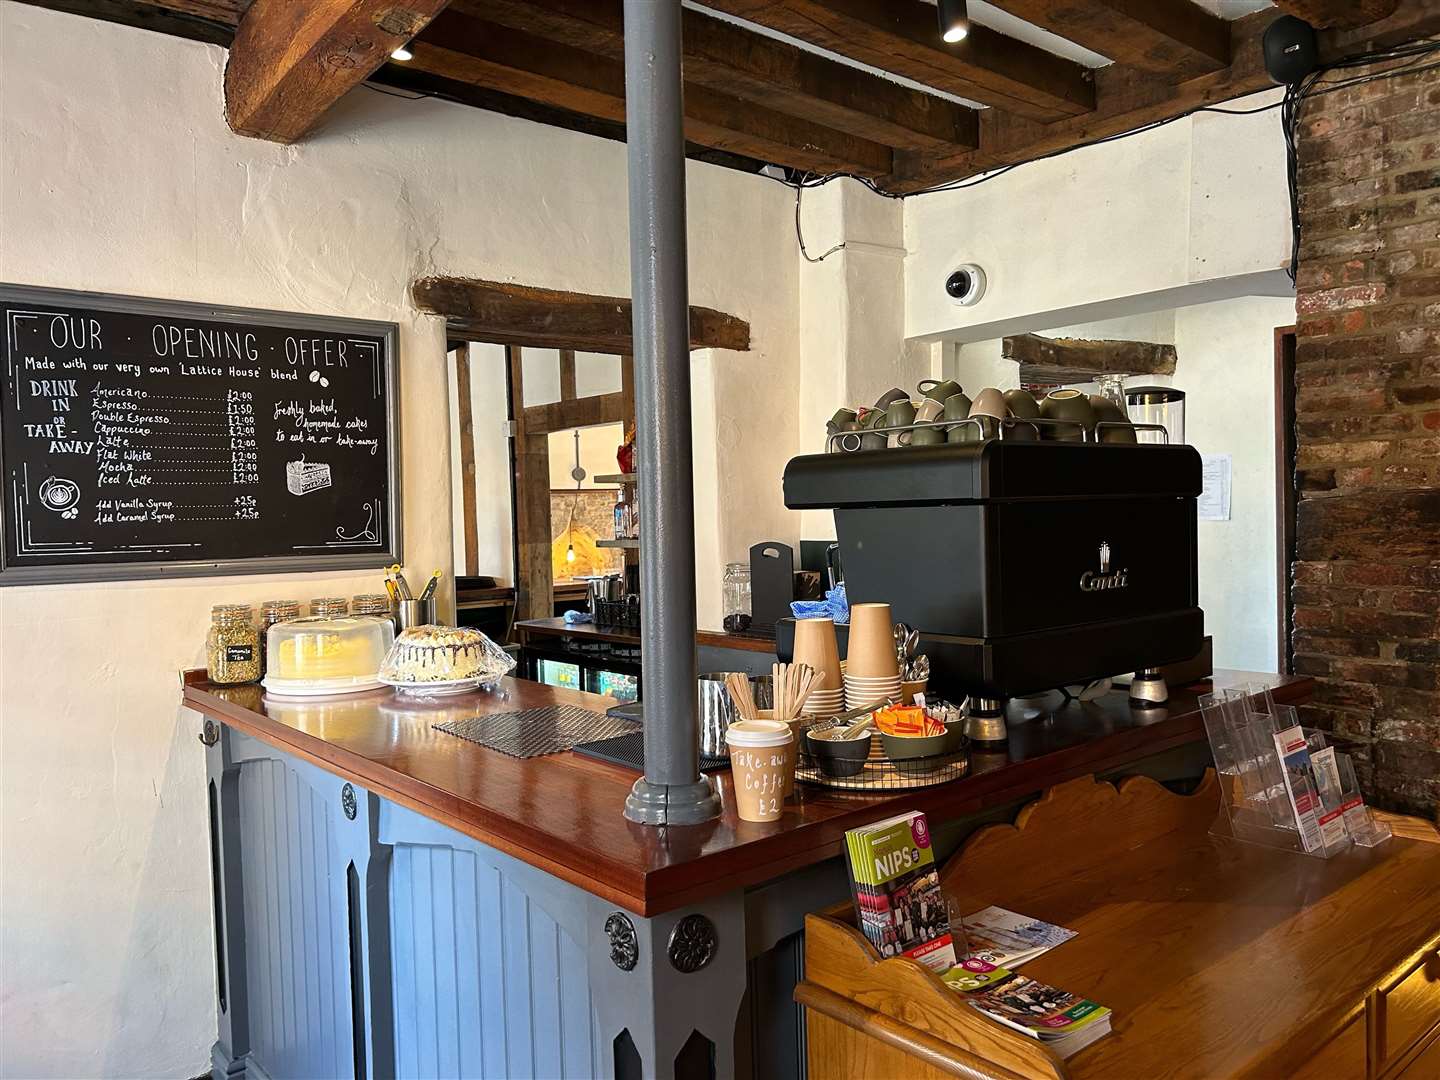 The coffee area, which also serves takeaway drinks from 9.30am